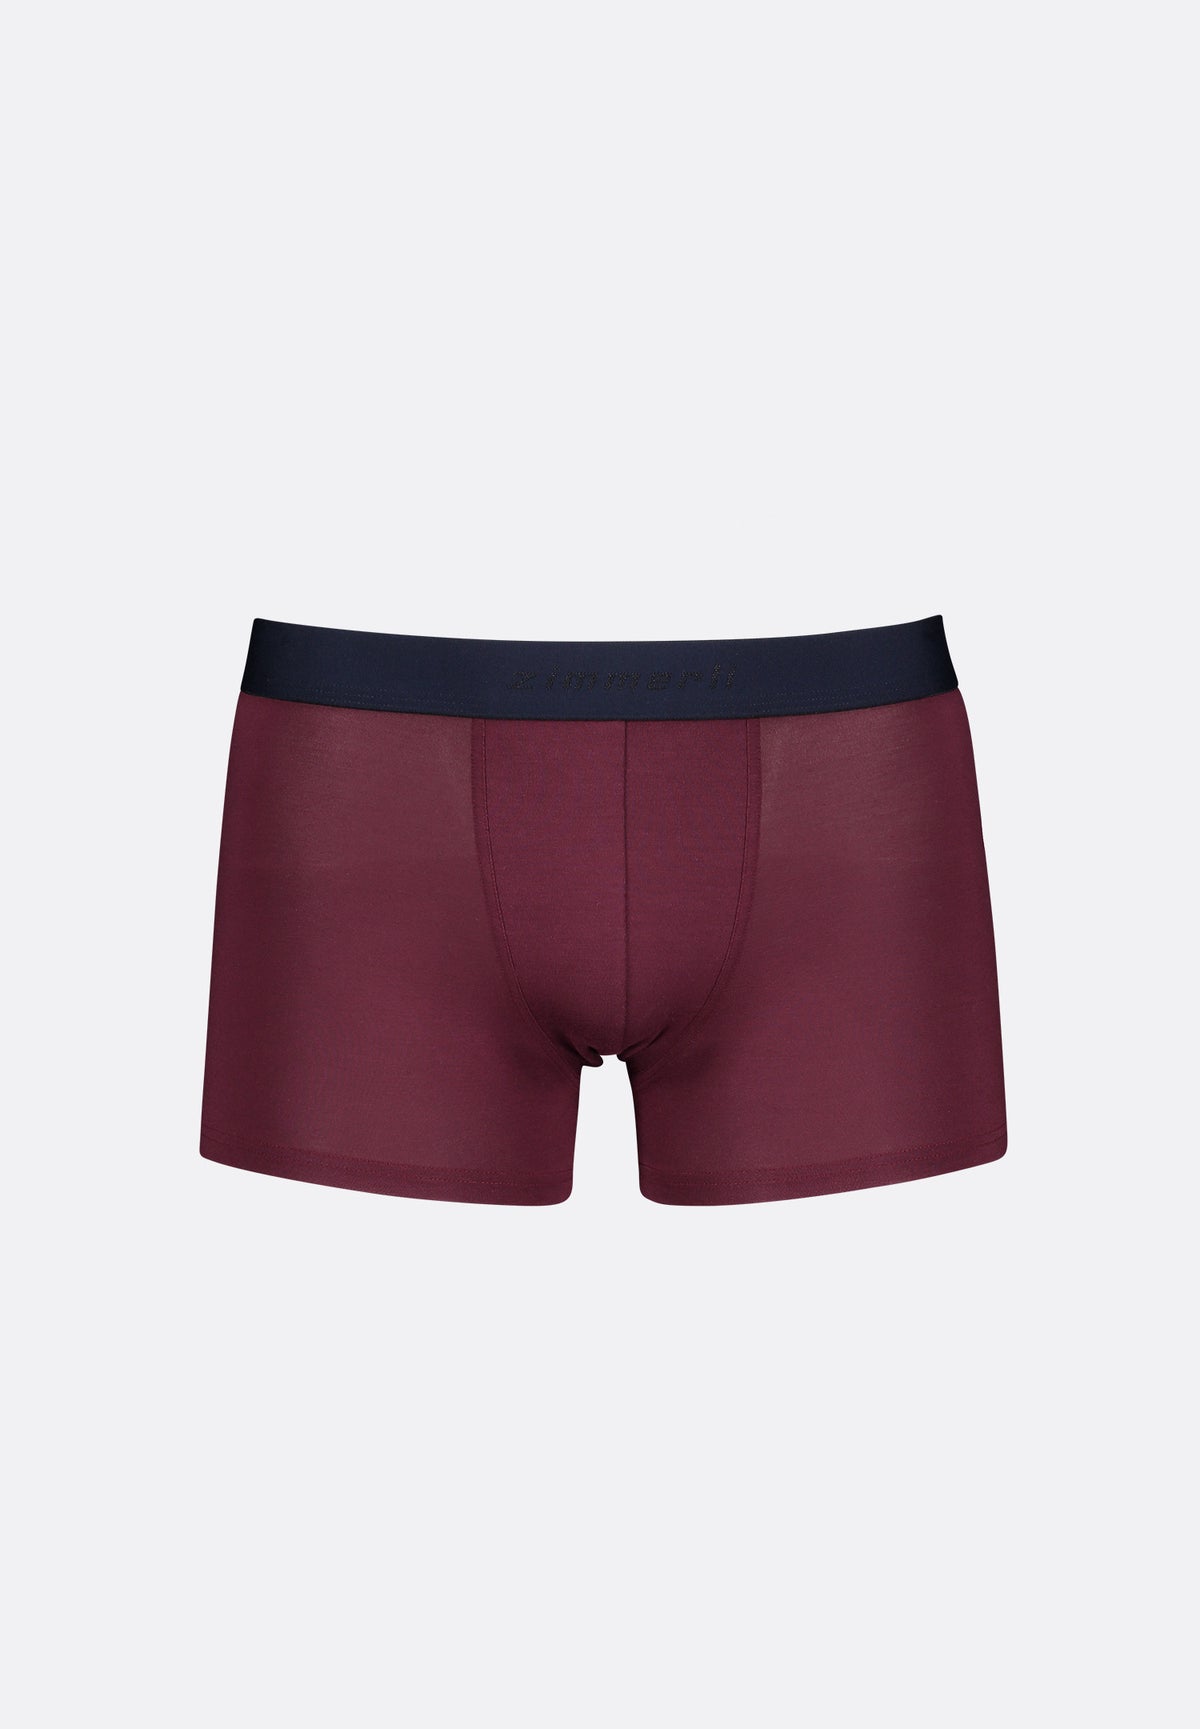 Pureness | Boxer Briefs - burgundy red